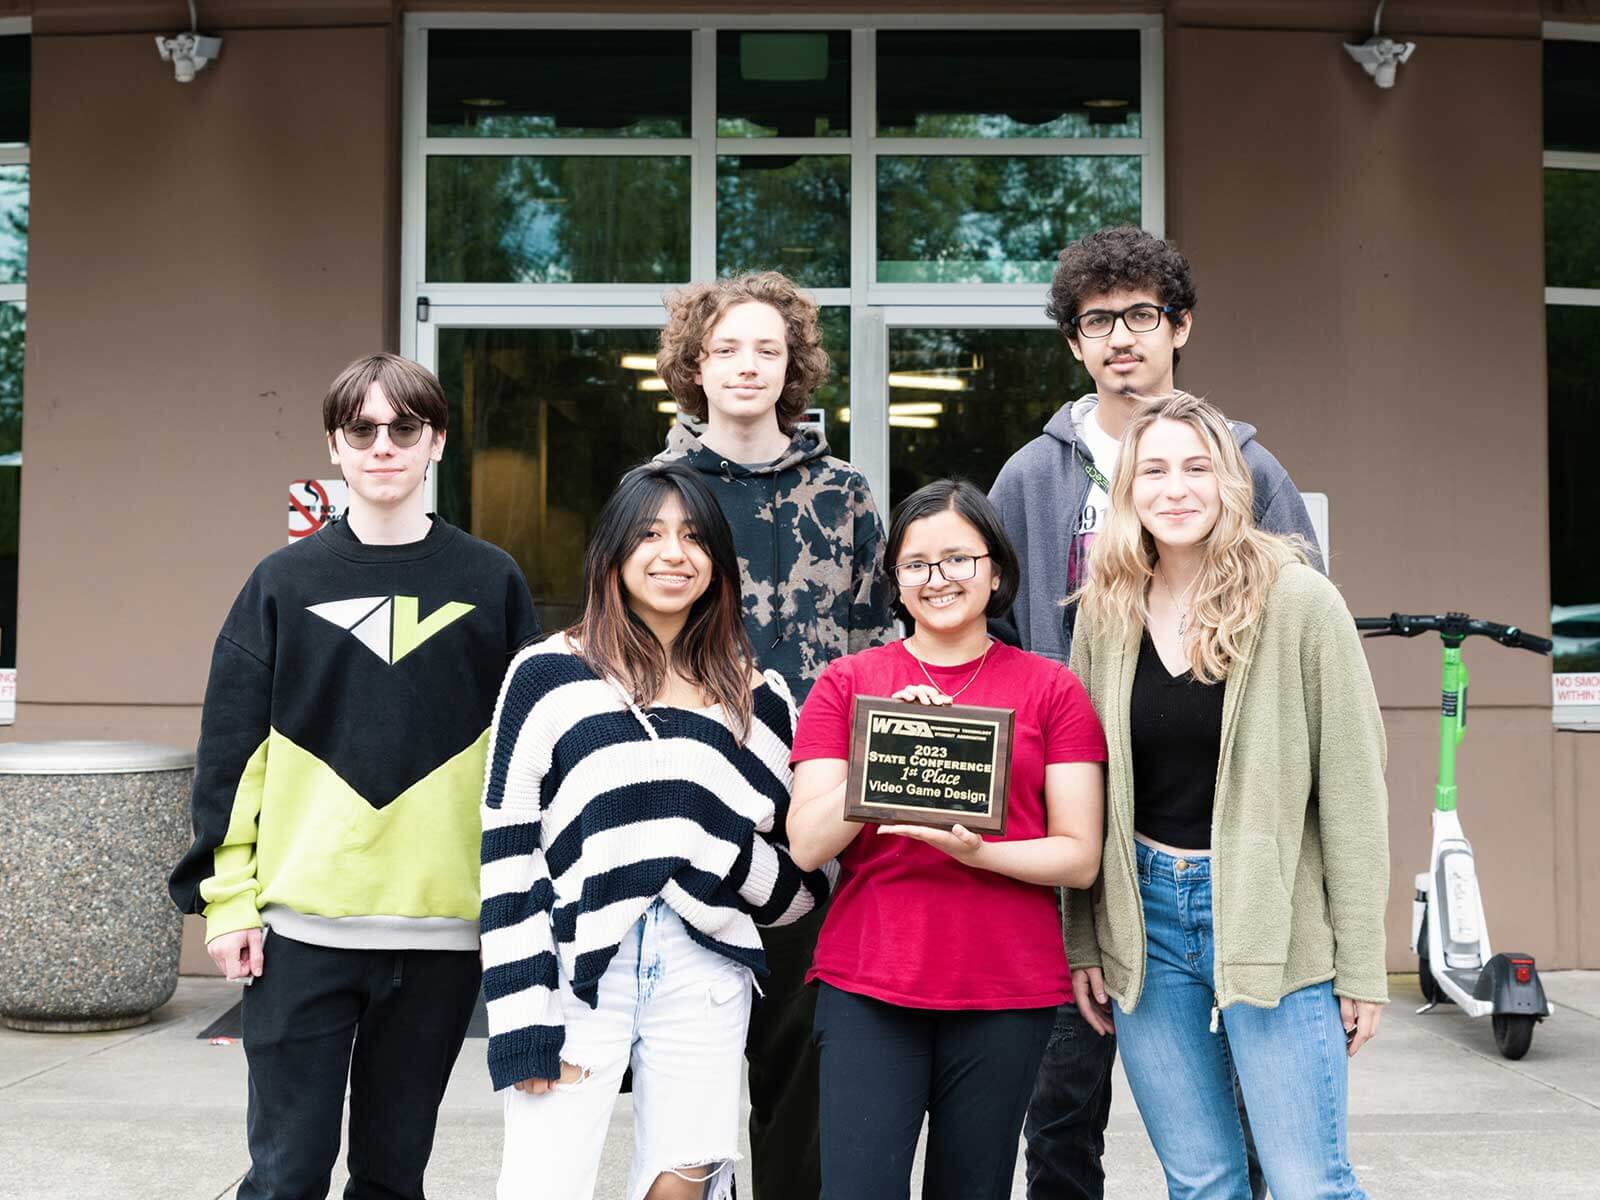 Group photo of six DigiPen WANIC students posing with first-place award plaque